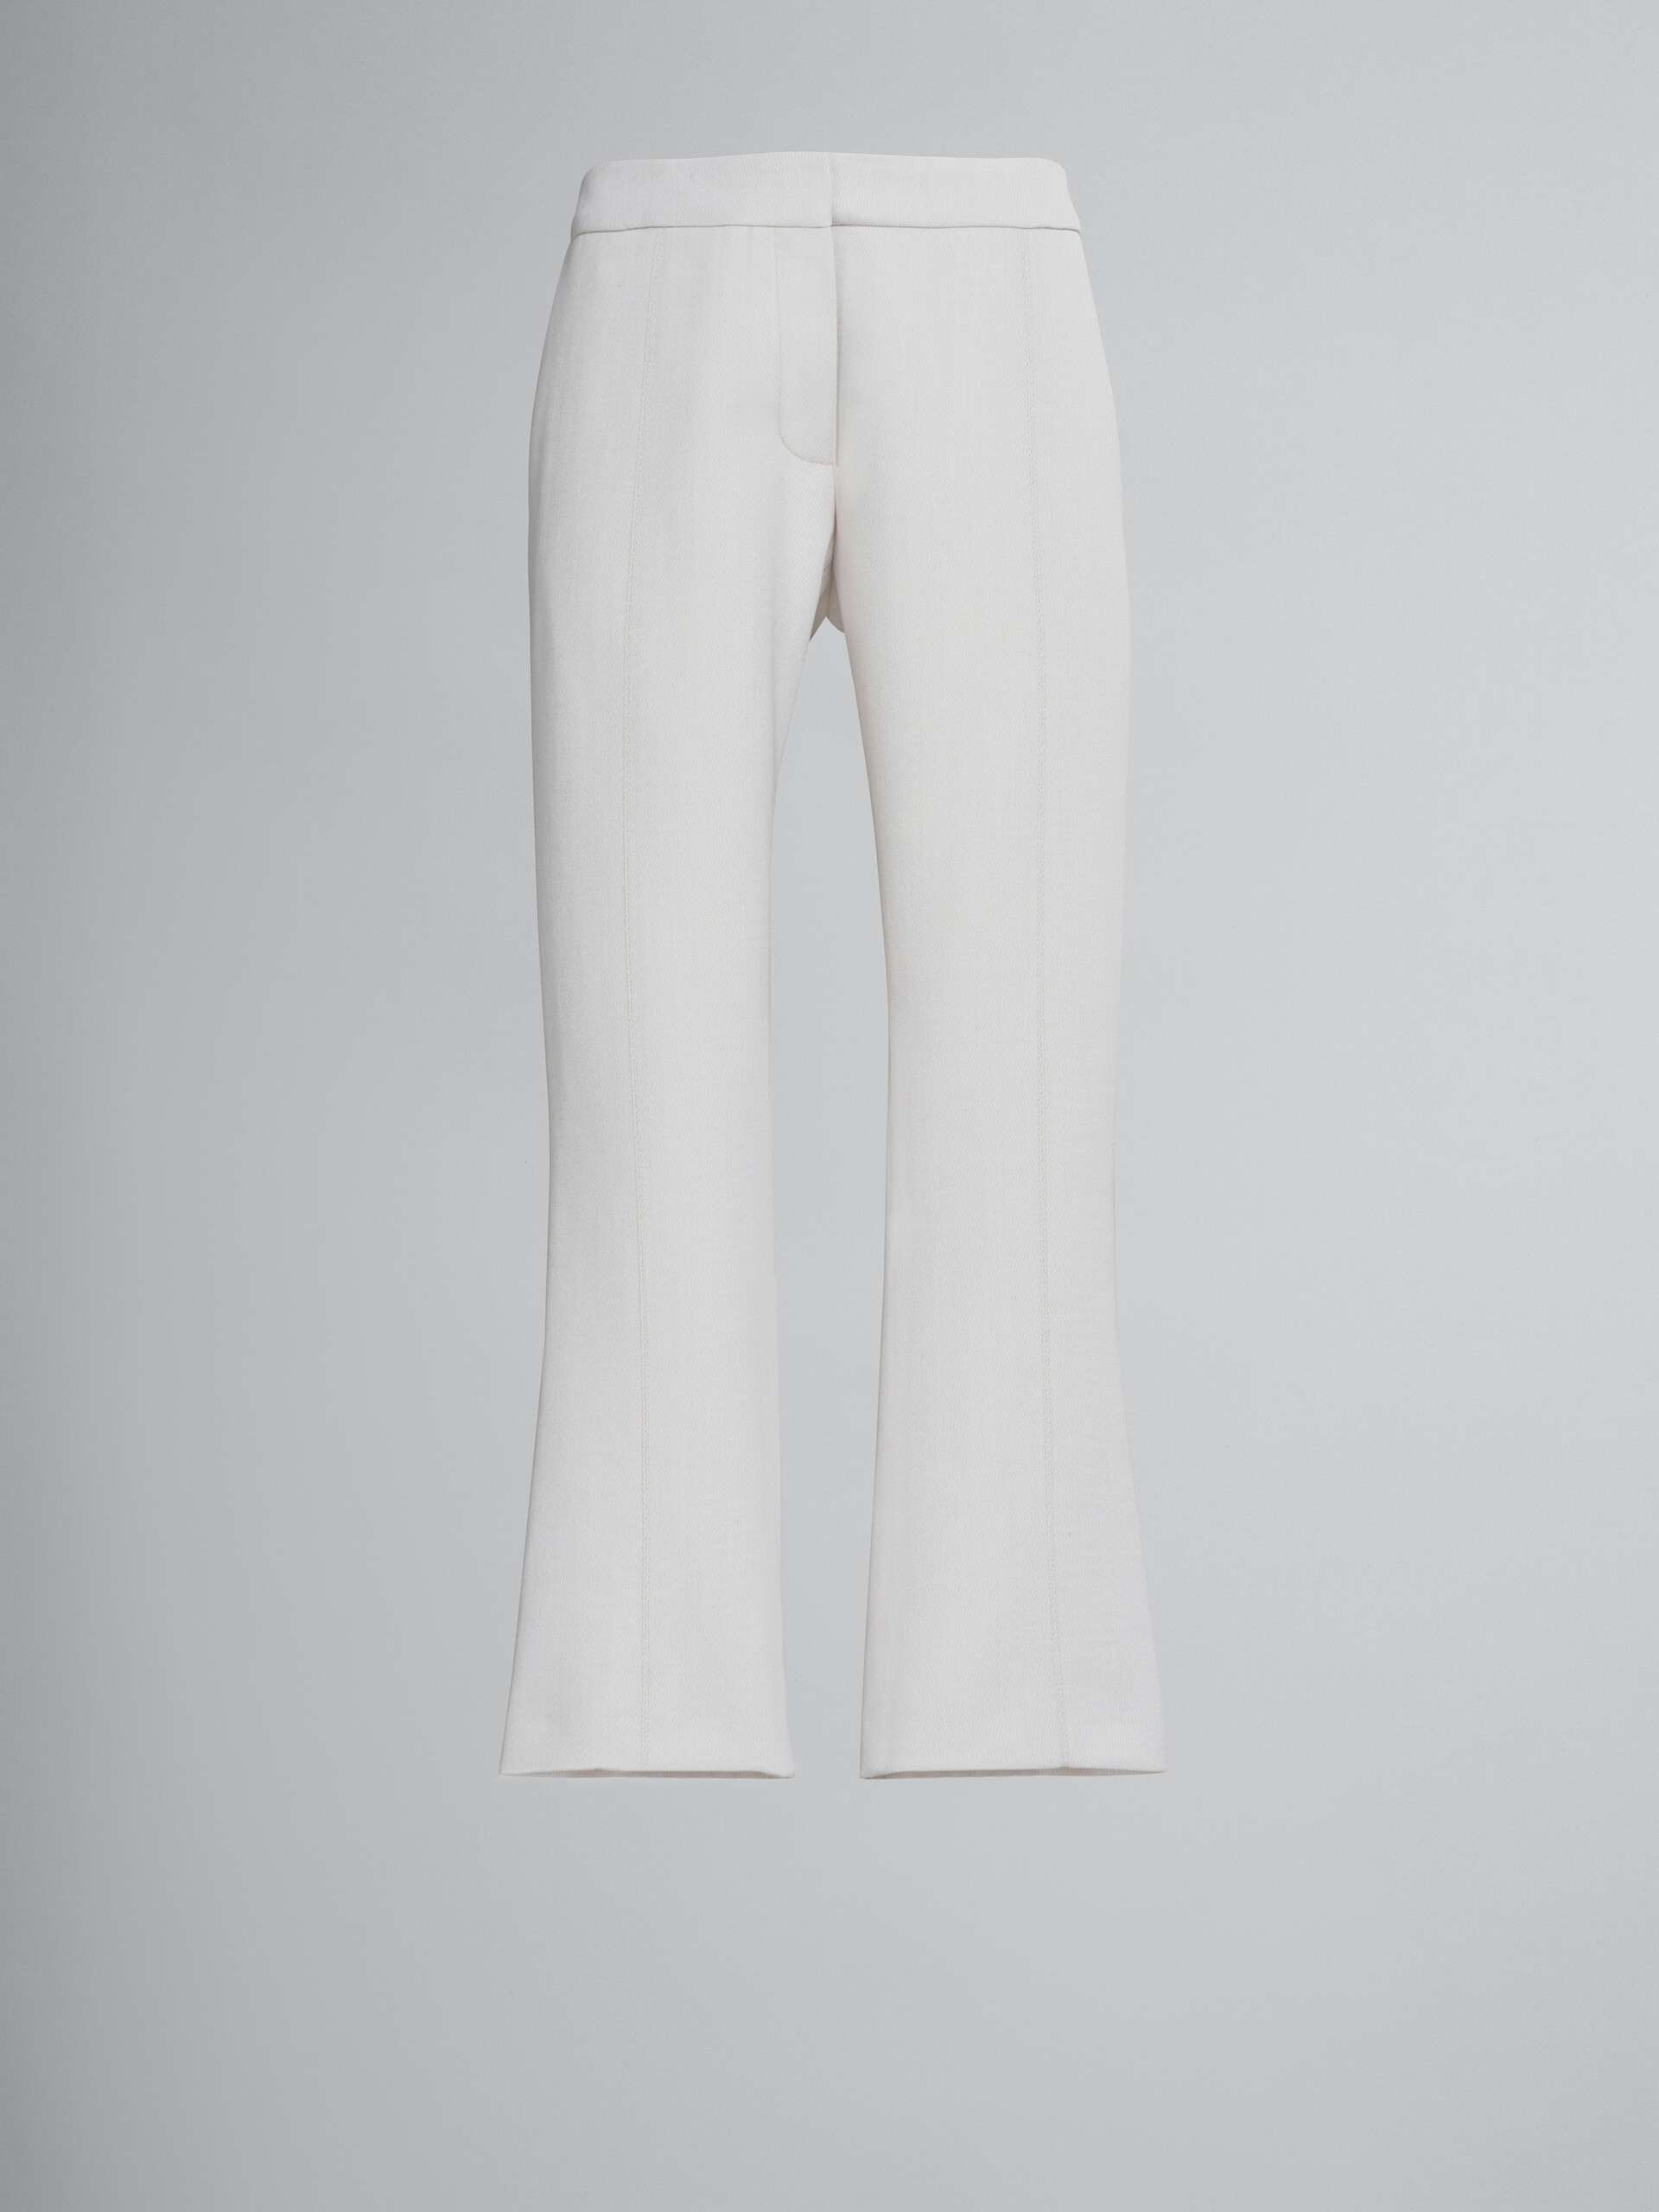 Flared trousers in white cavalry wool - Pants - Image 1